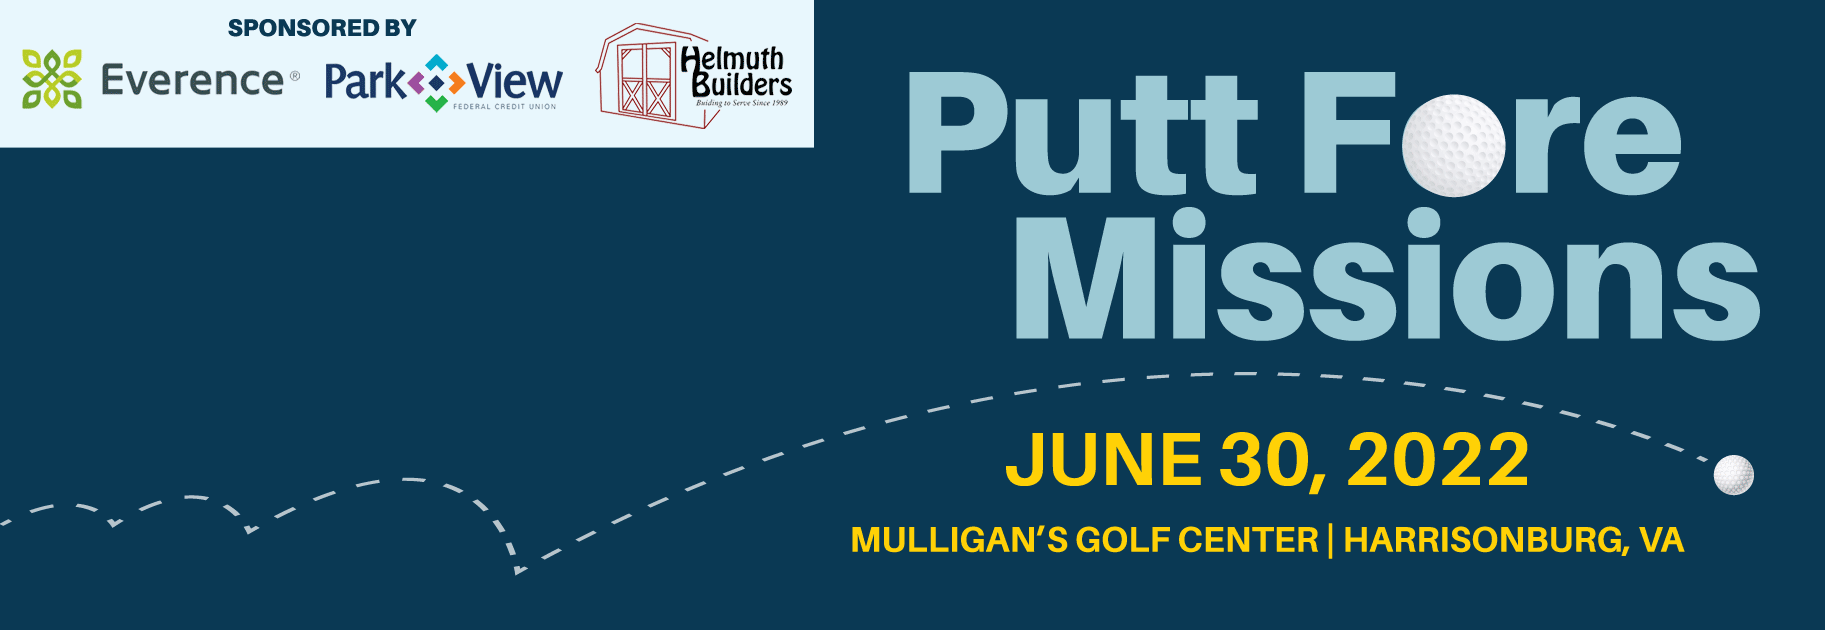 Putt Fore Missions